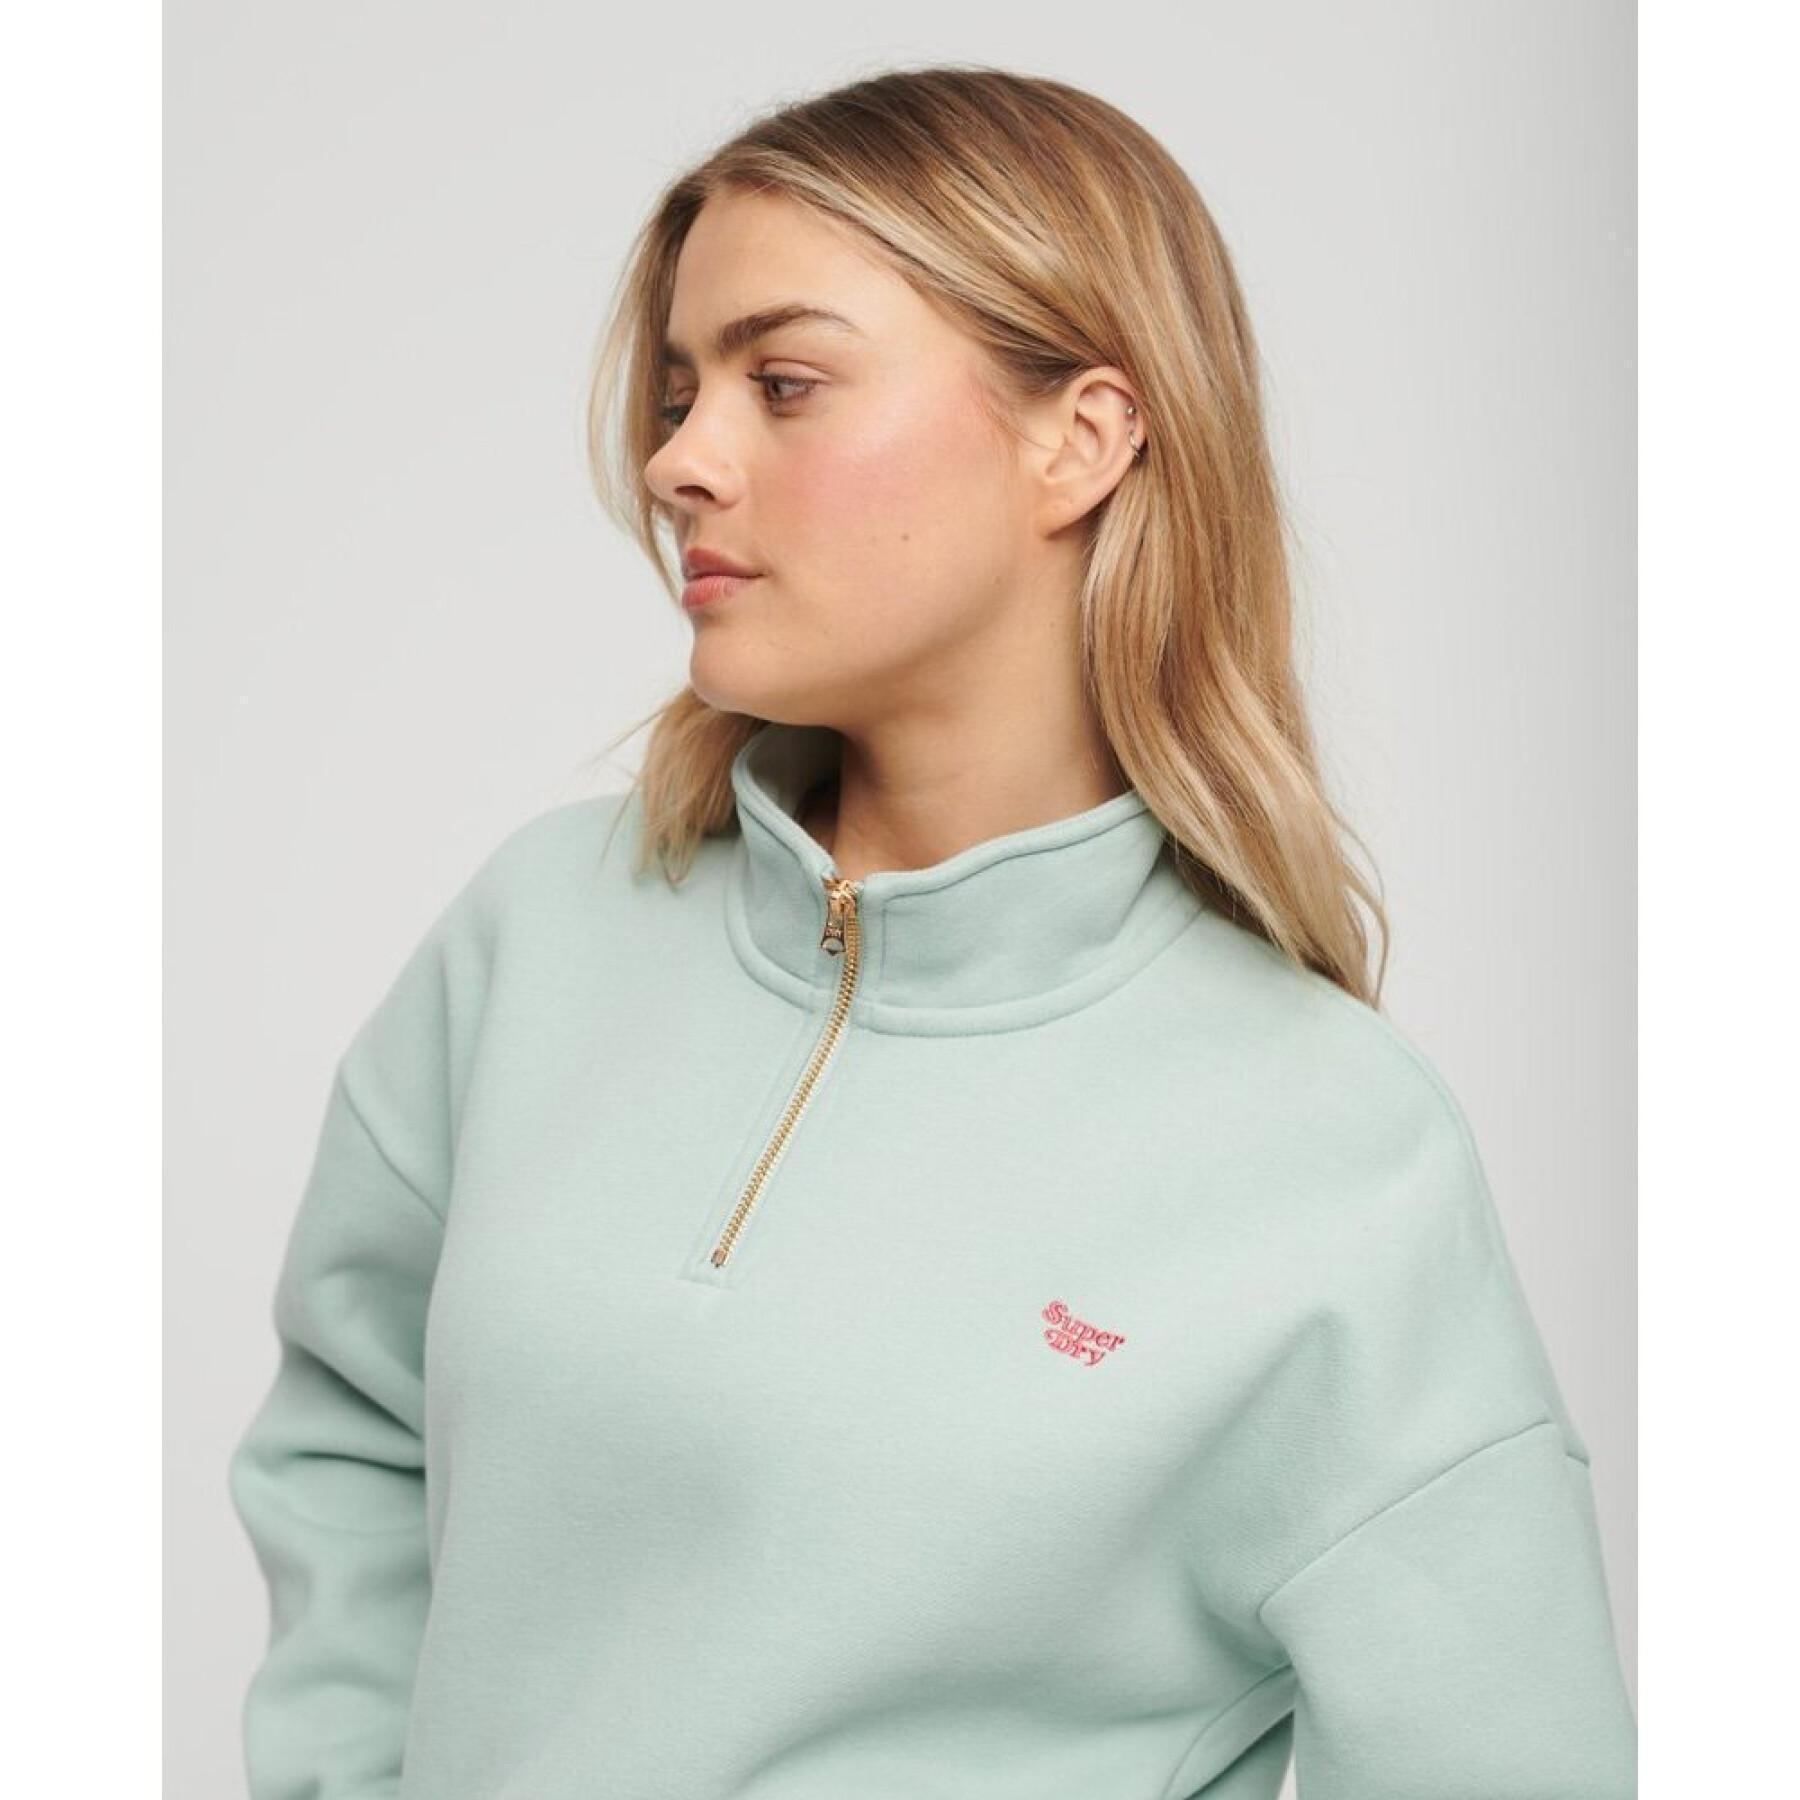 Women's sweatshirt with tunisian collar and embroidered logo Superdry Vintage